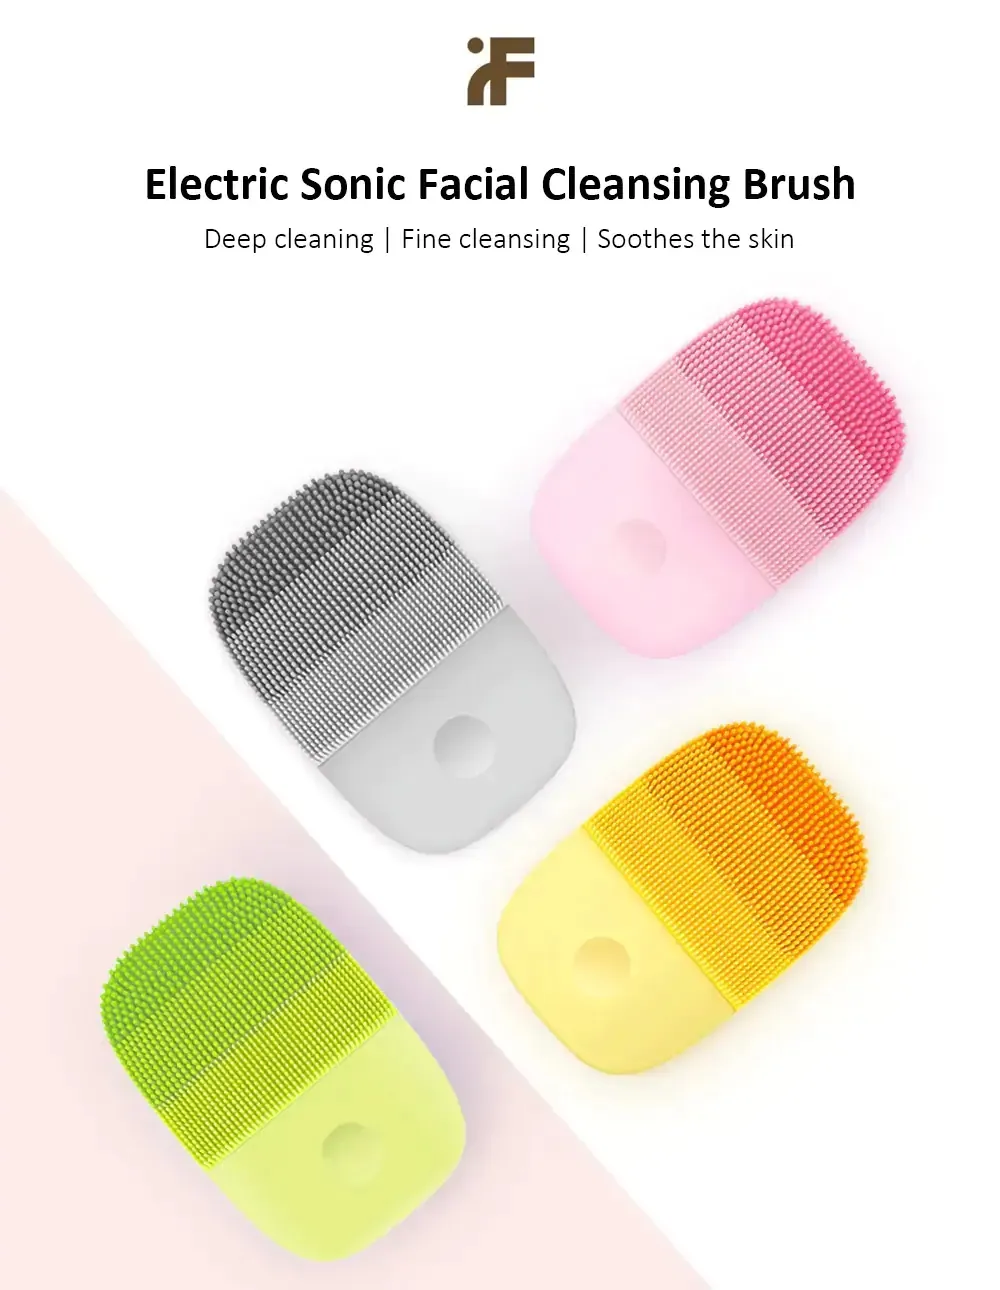 Xiaomi Youpin inFace Facial Cleaning Brush Mijia Deep Cleansing Face Waterproof Silicone Electric Sonic Cleanser Clean Apparaat C1